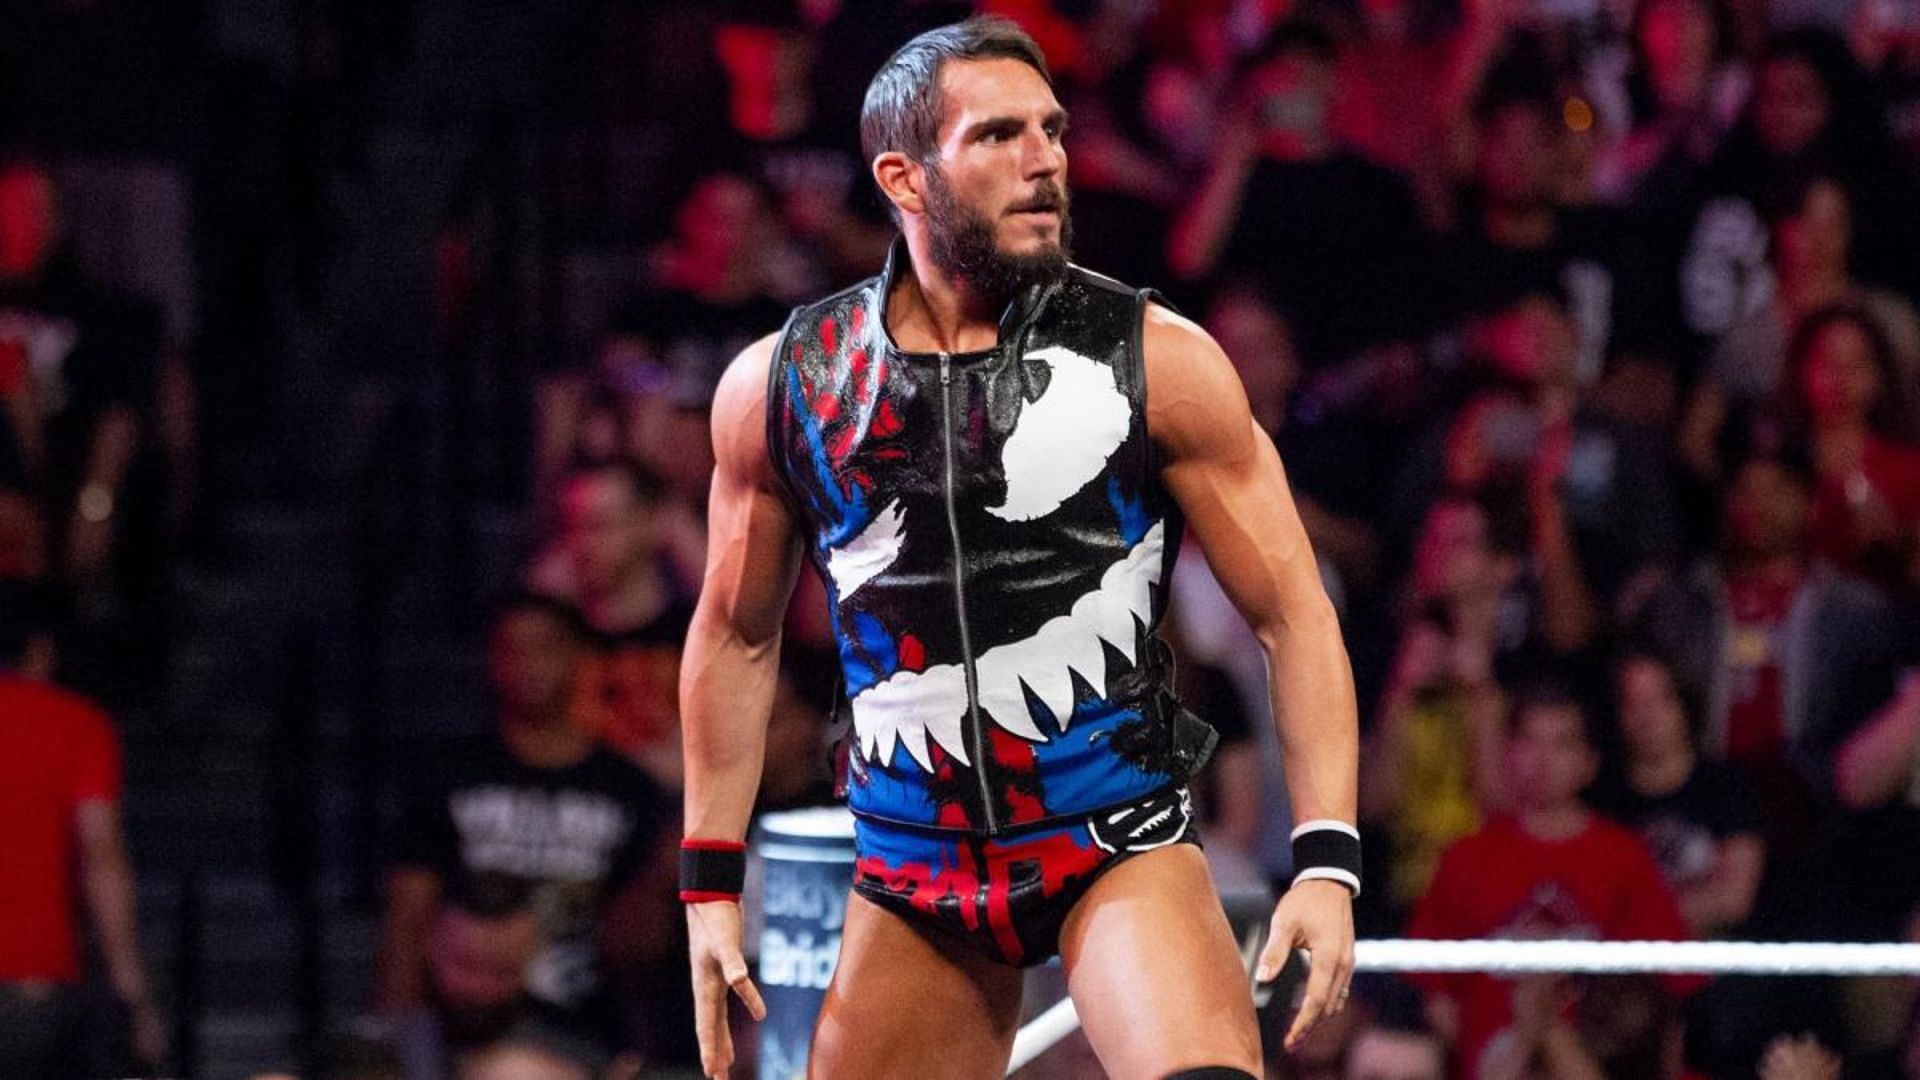 Johnny Gargano has provided an update on his wrestling future.